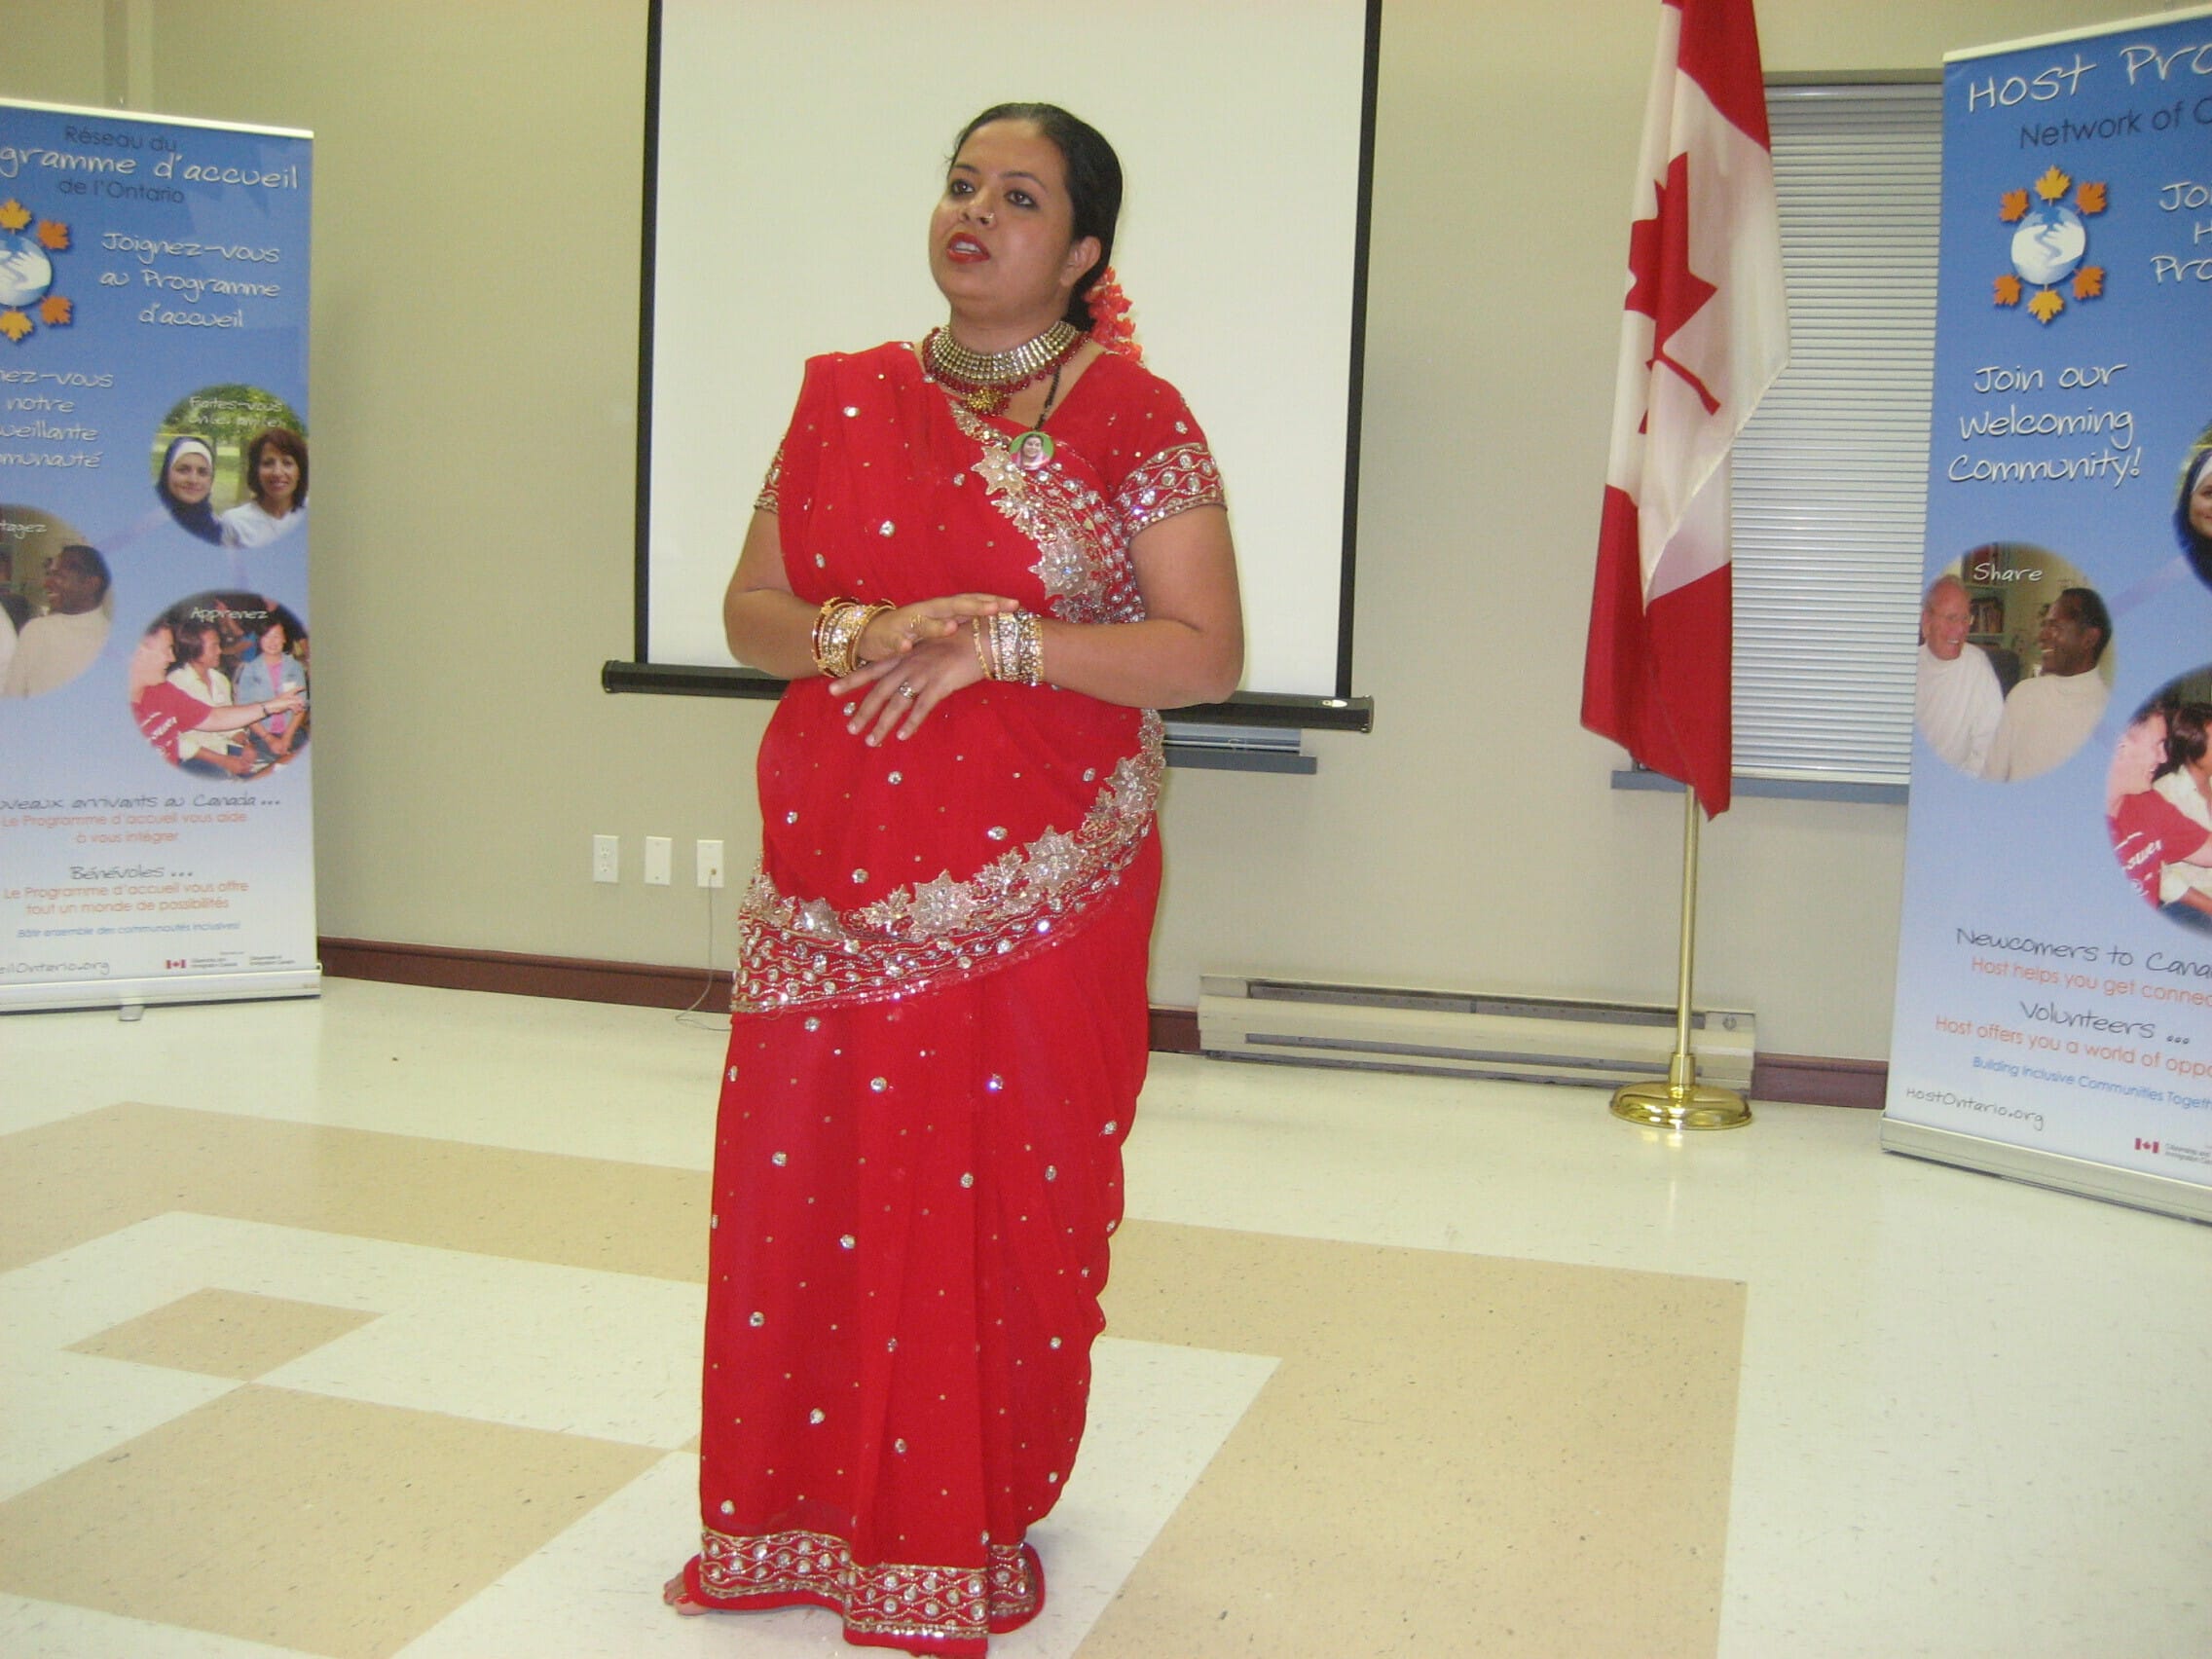 Anandita introducing Sahaja Yoga Meditation and her Art to representatives from many countries of the World, arrived to Canada/ Halton as immigranta - in Oakville, Dec 2